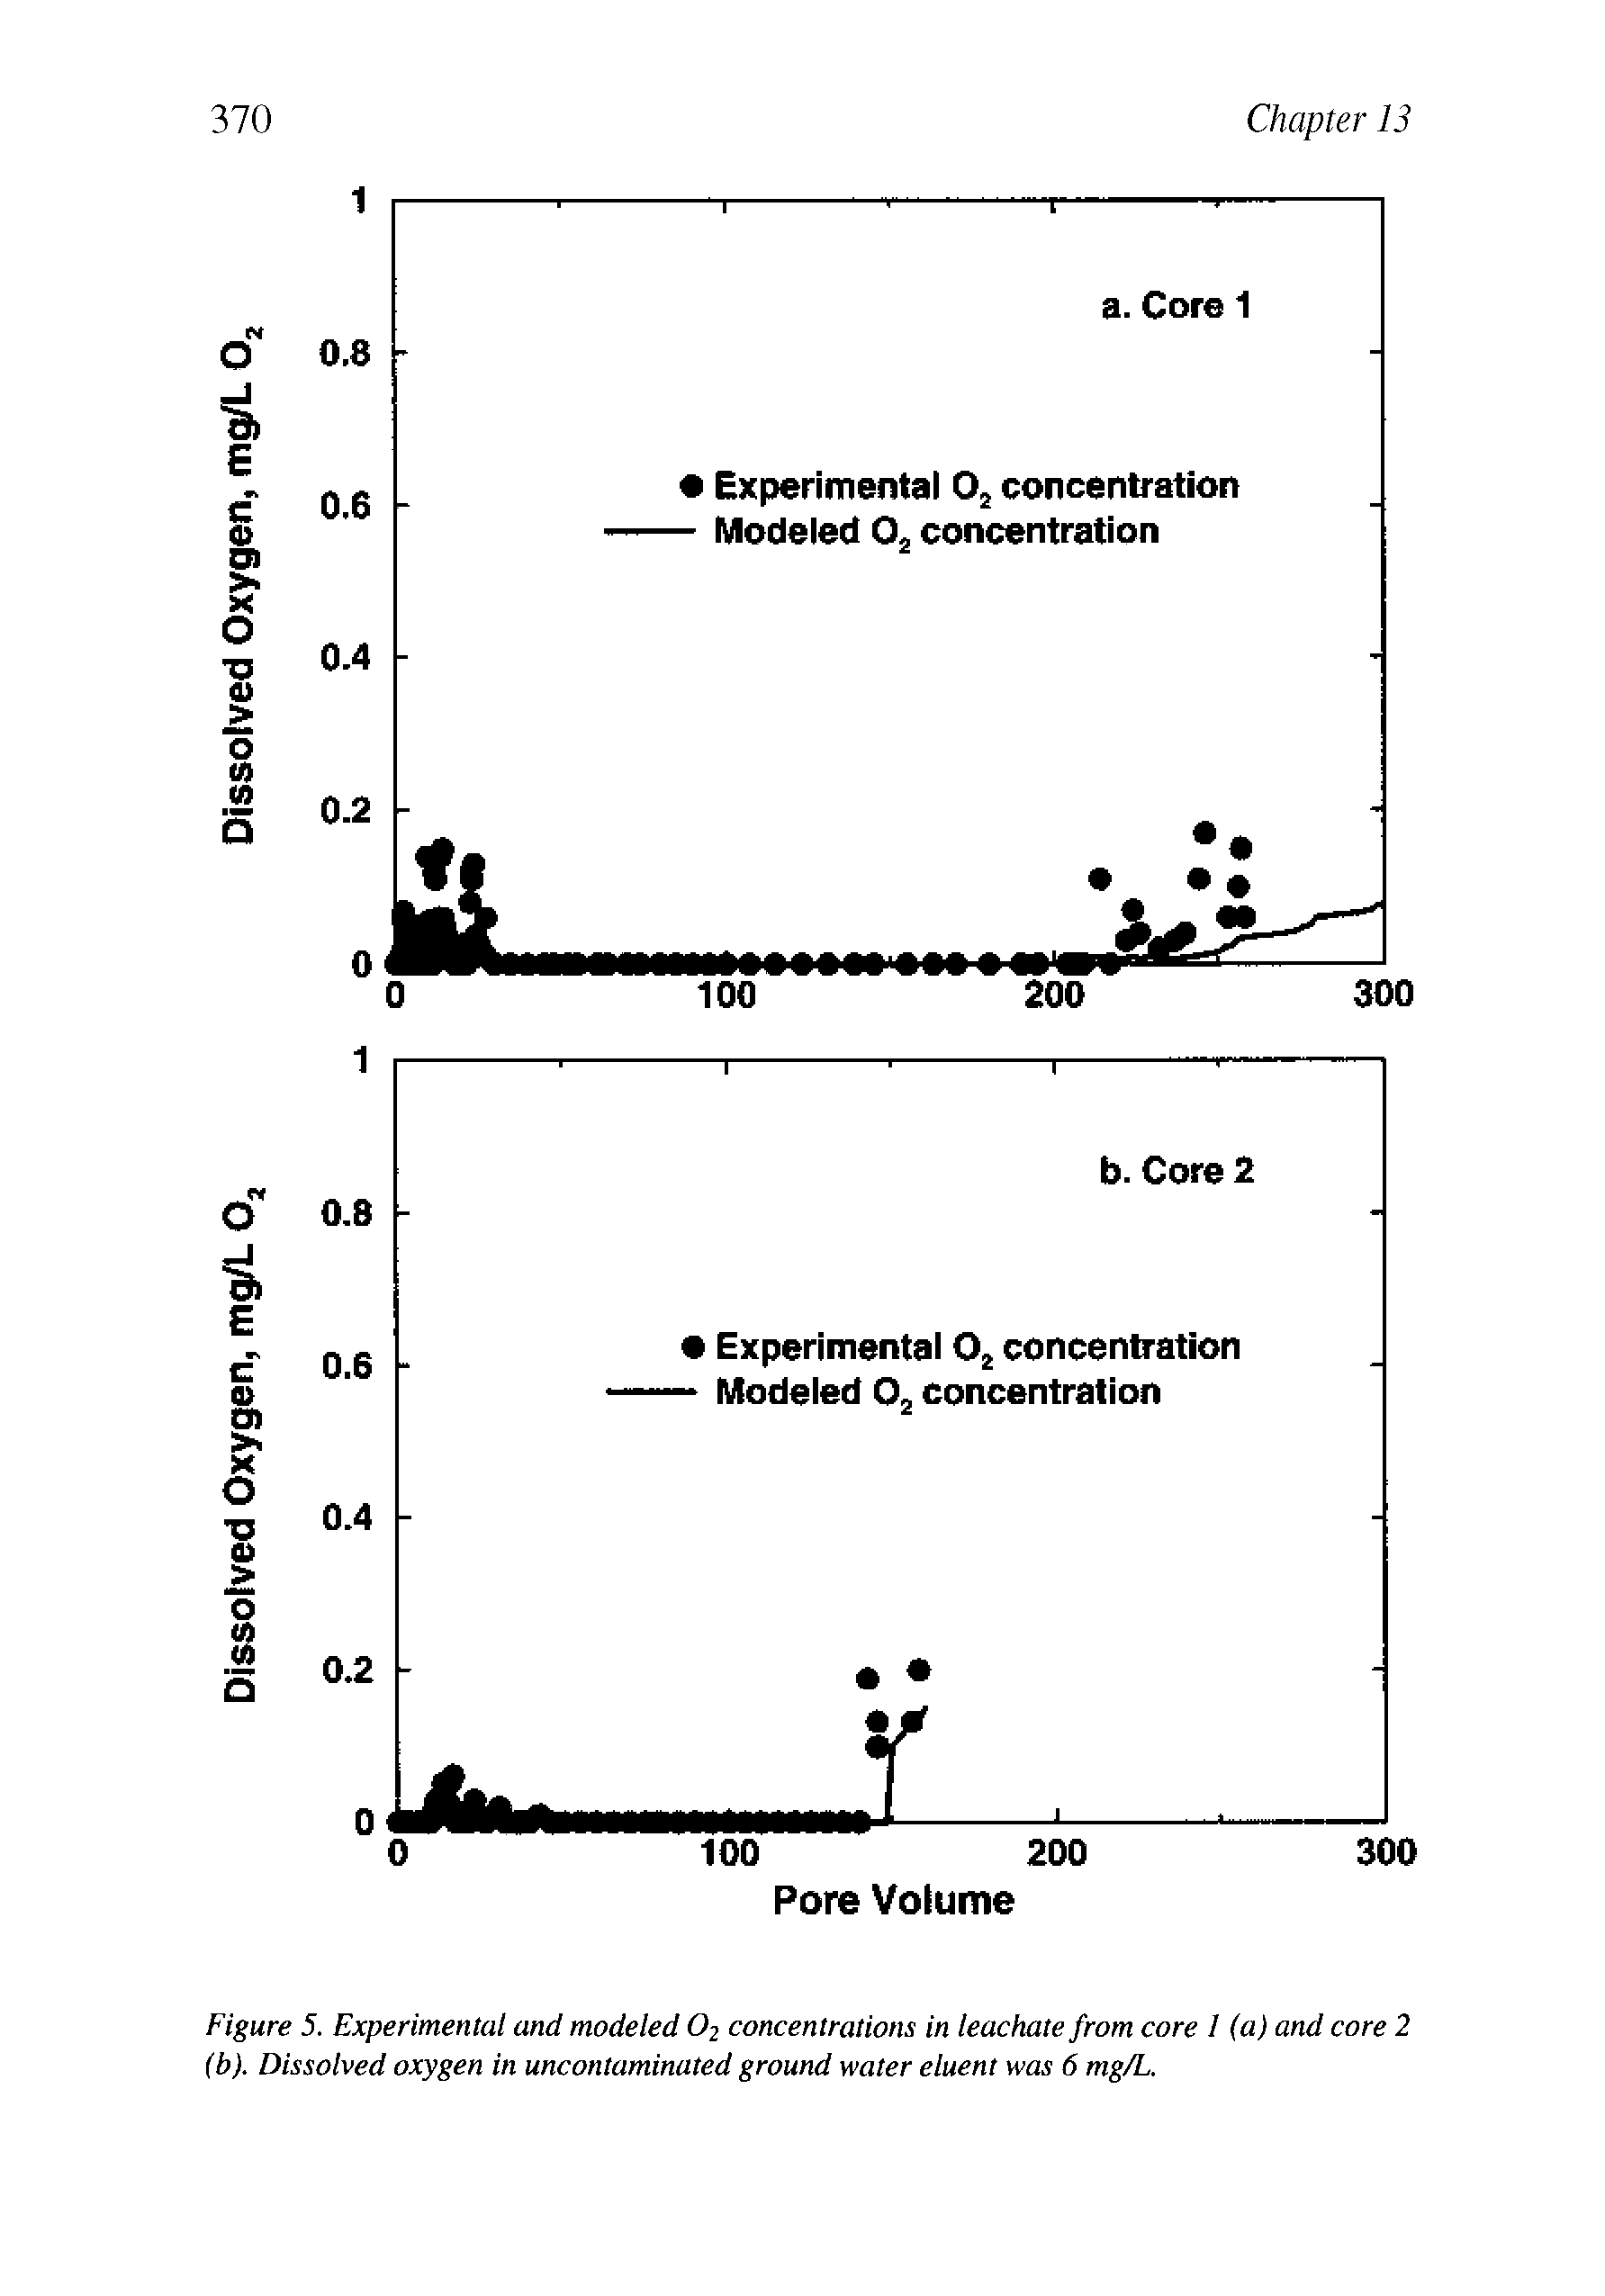 Figure 5. Experimental and modeled O2 concentrations in leachate from core I (a) and core 2 (b). Dissolved oxygen in uncontaminated ground water eluent was 6 mg/L.